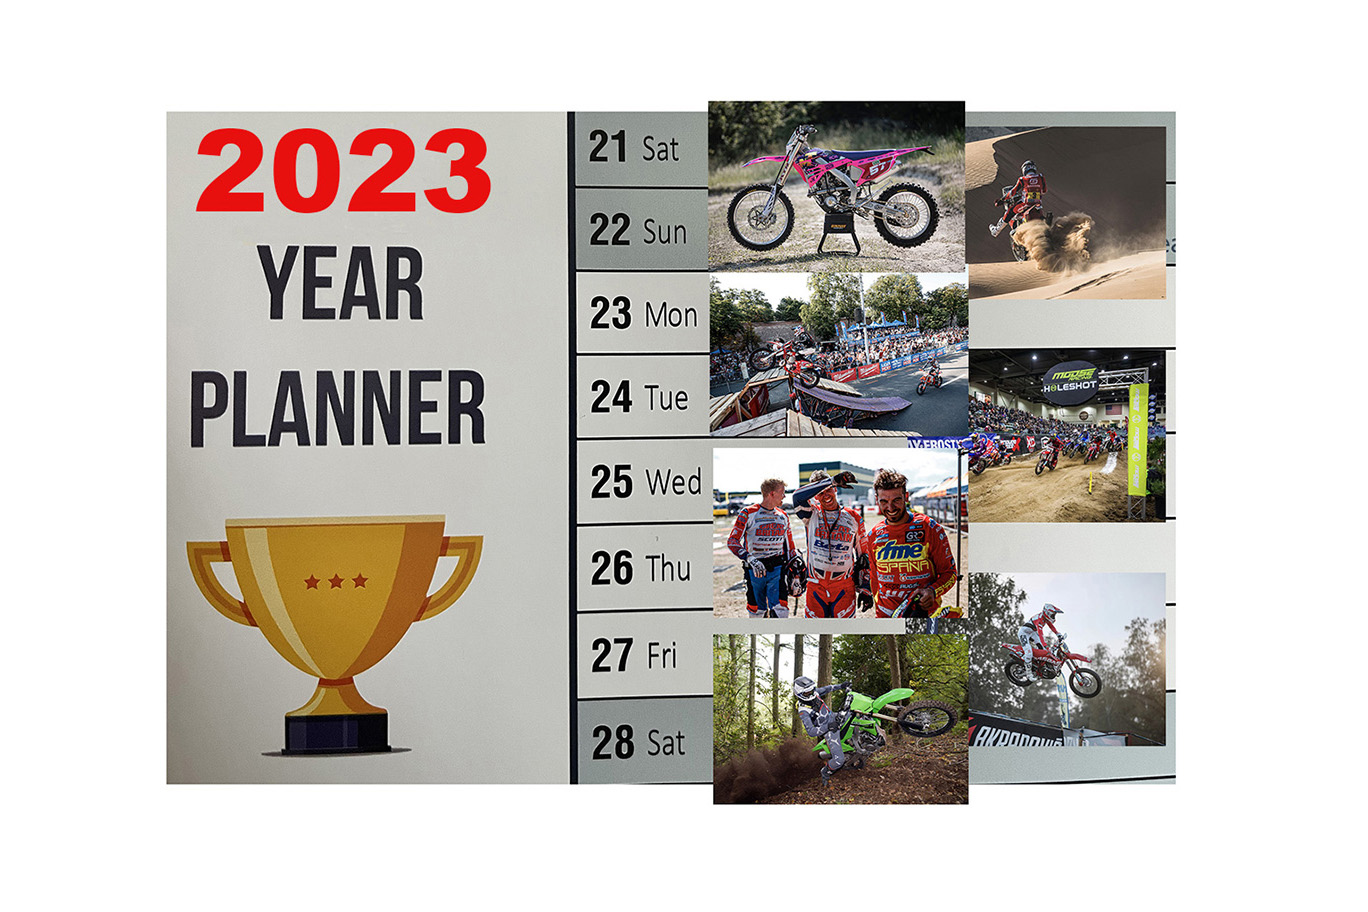 The List: Complete 2023 international enduro event guide